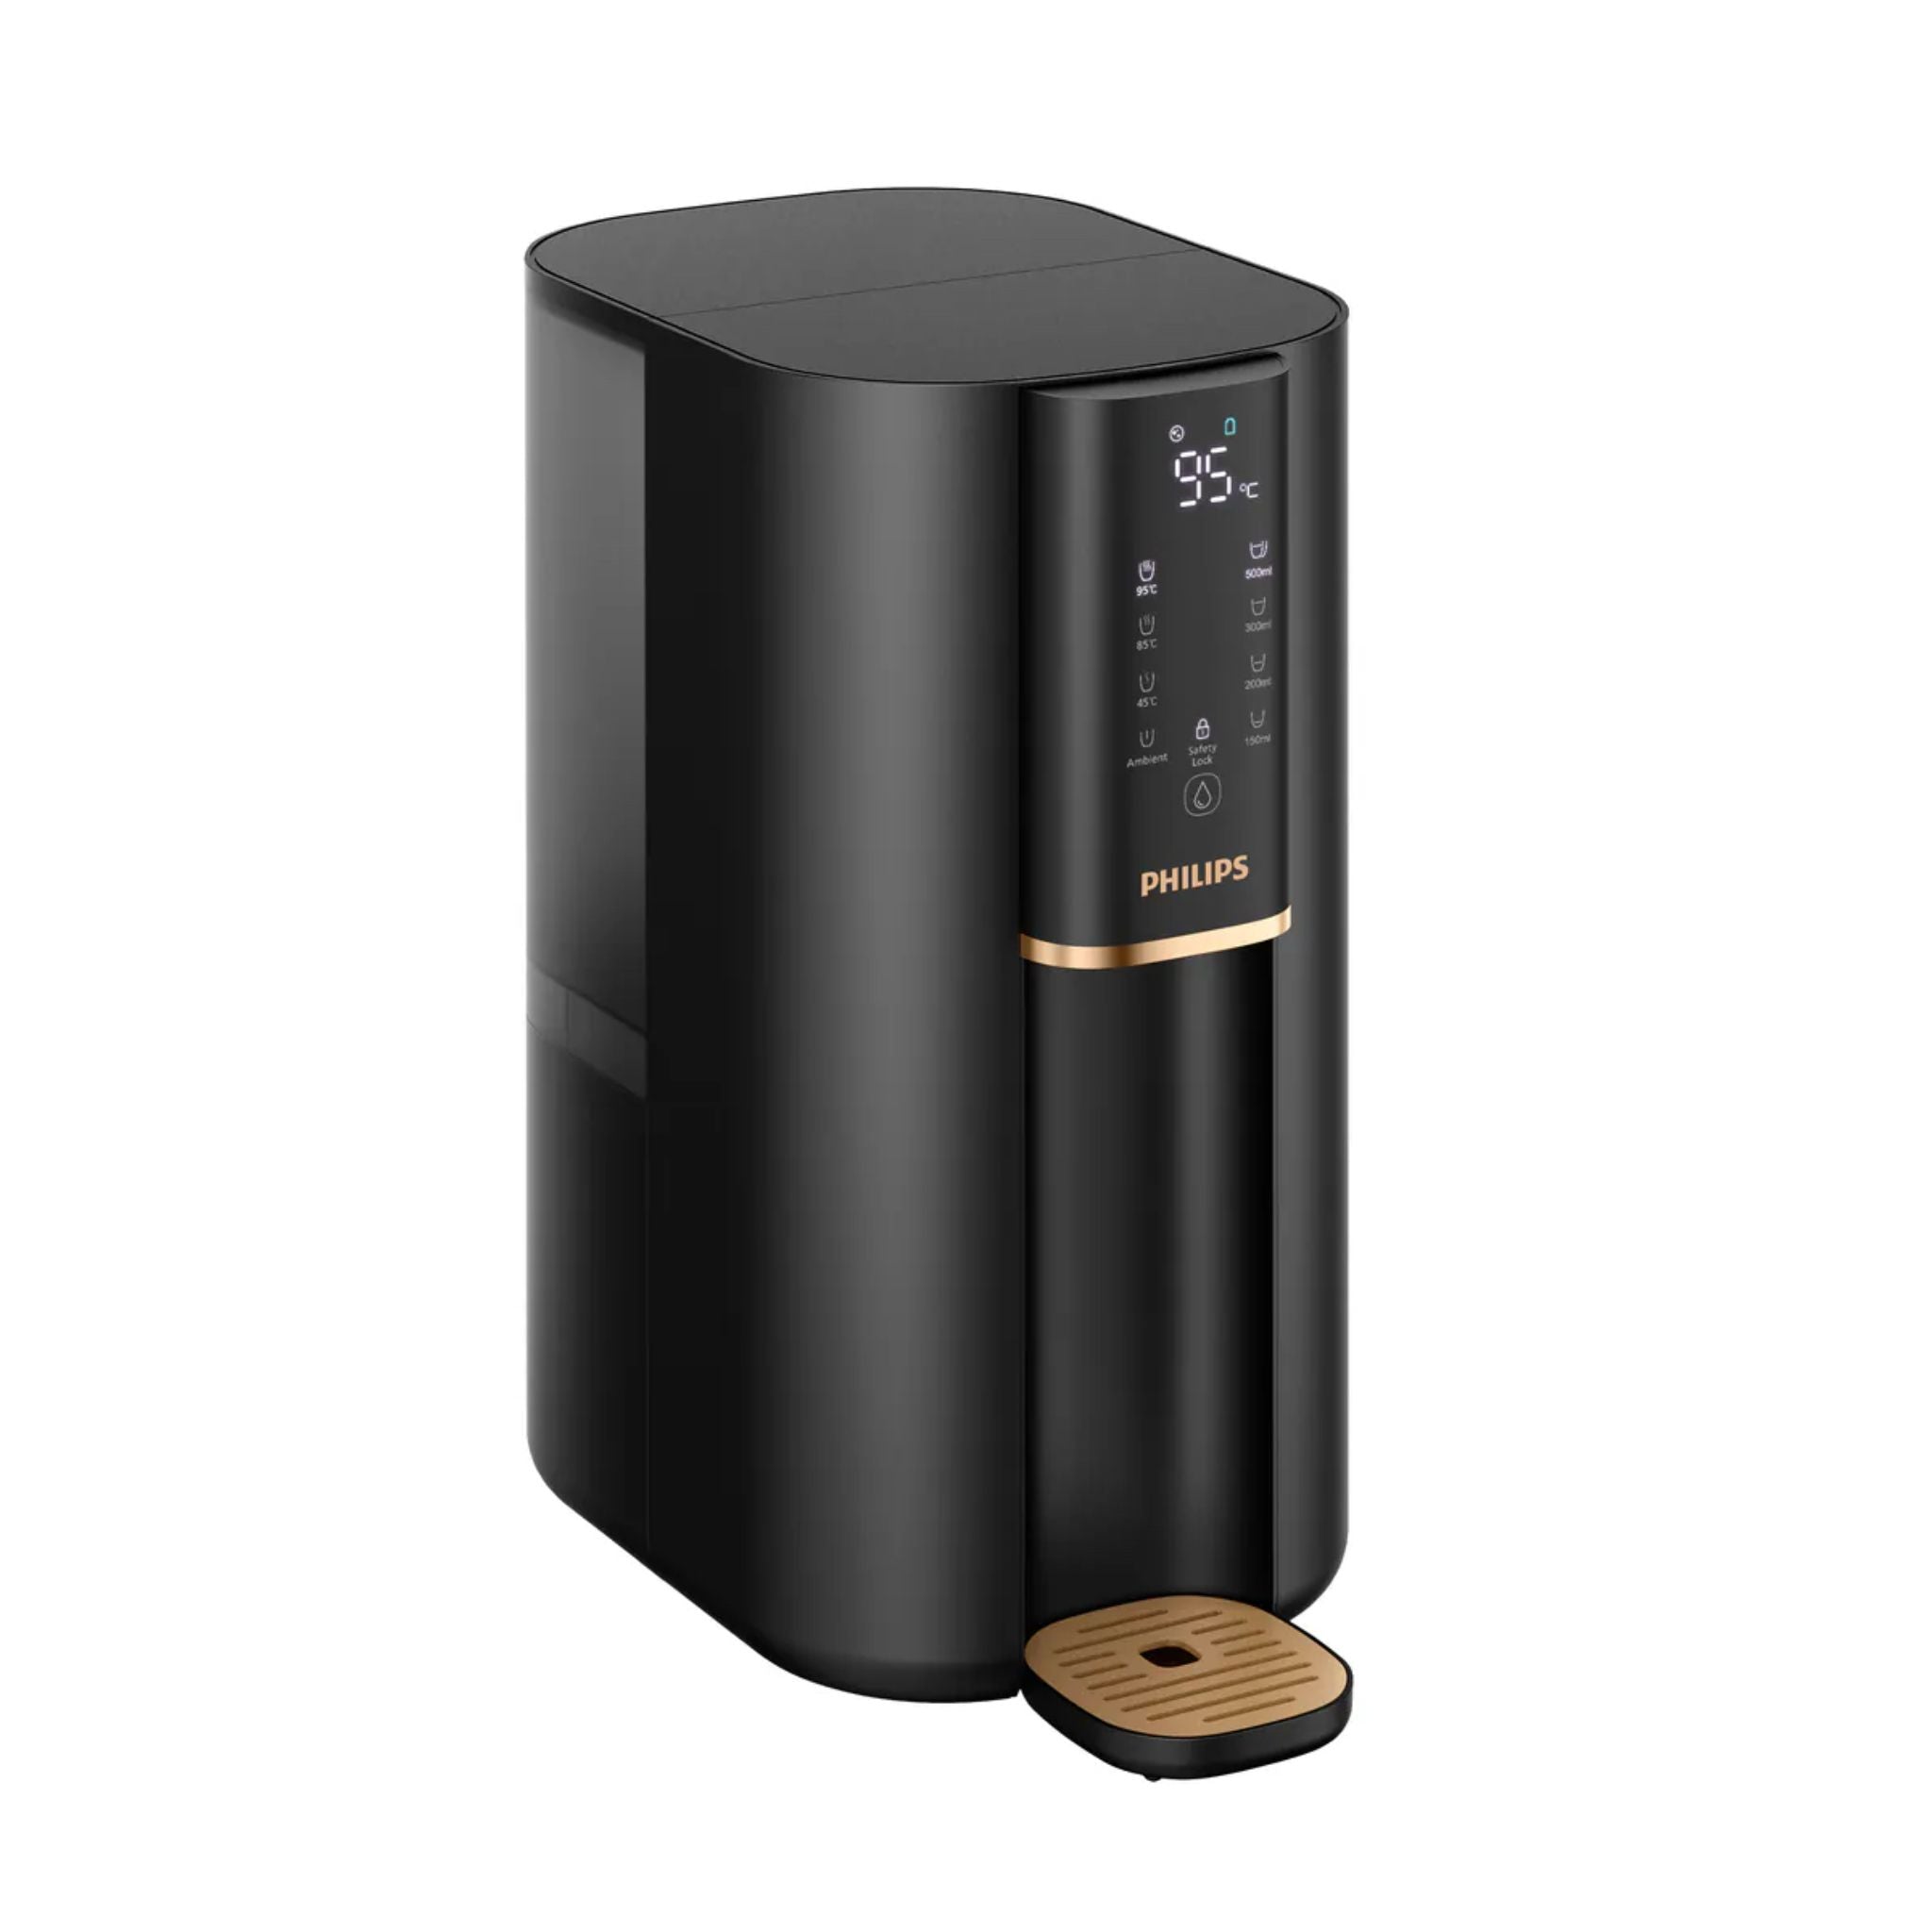 clumsy motif Gather Philips Water RO Water Dispenser - Black (ADD6901HBK01-90) – OG Singapore